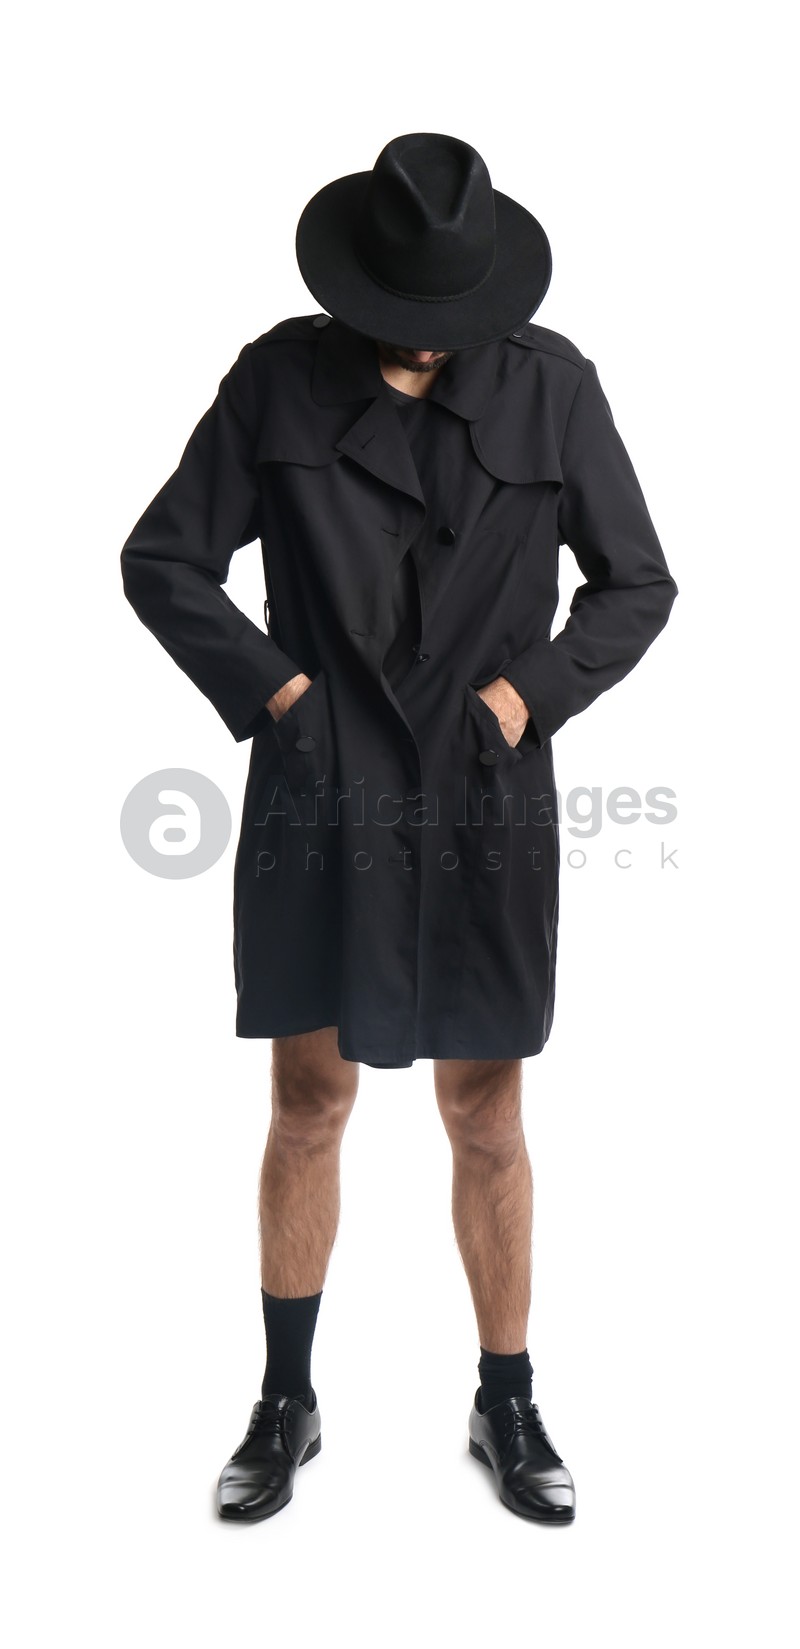 Photo of Exhibitionist in coat and hat isolated on white